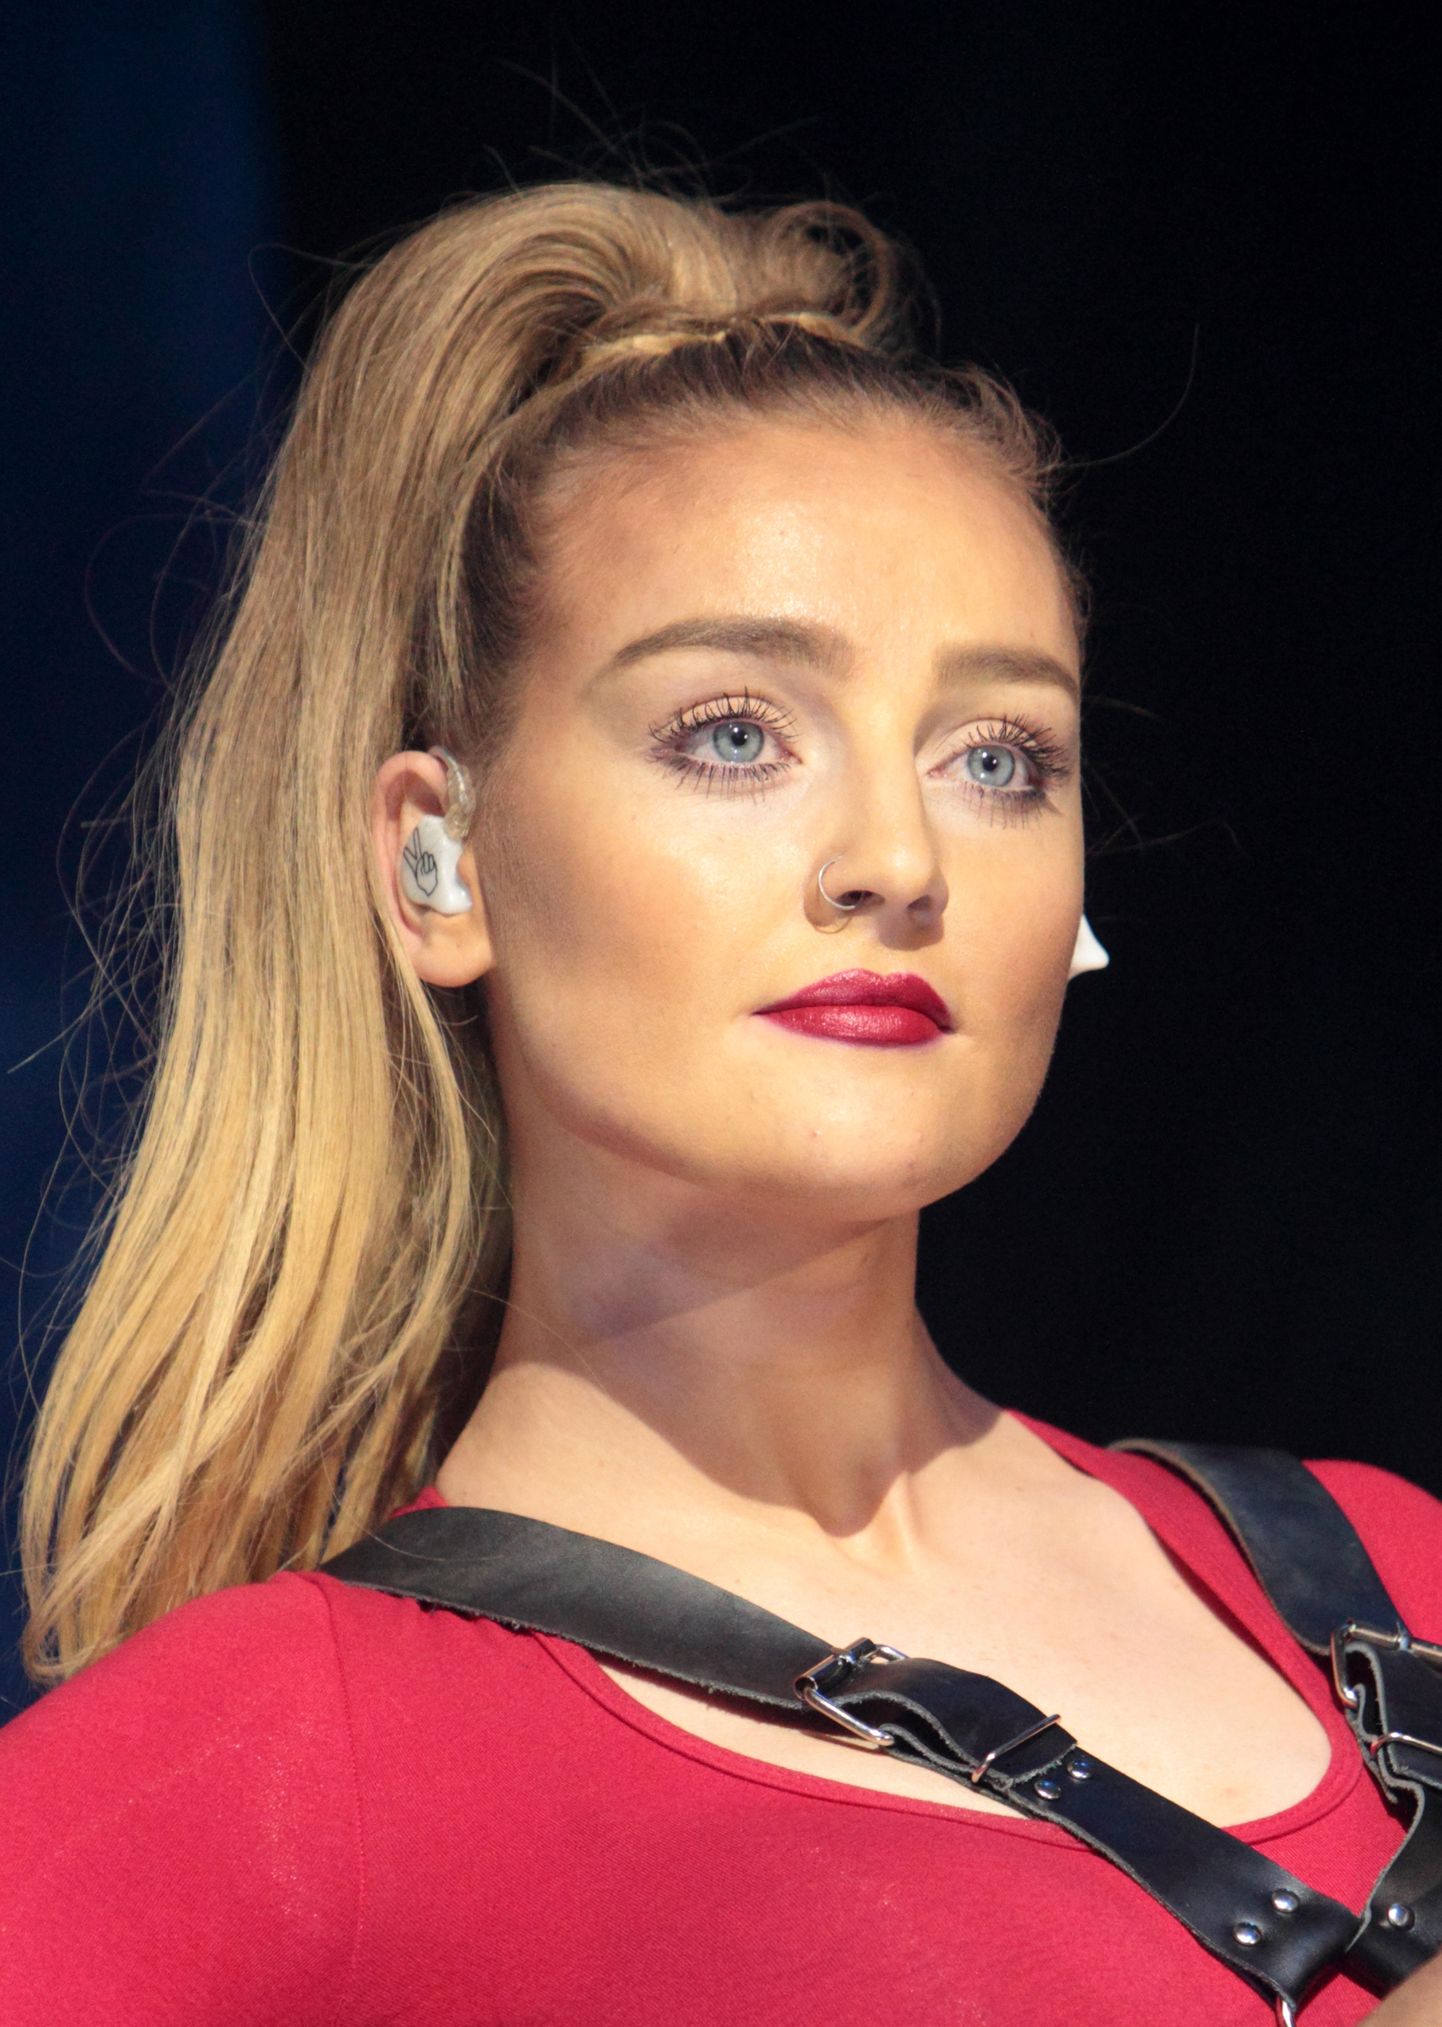 Perrie Edwards.